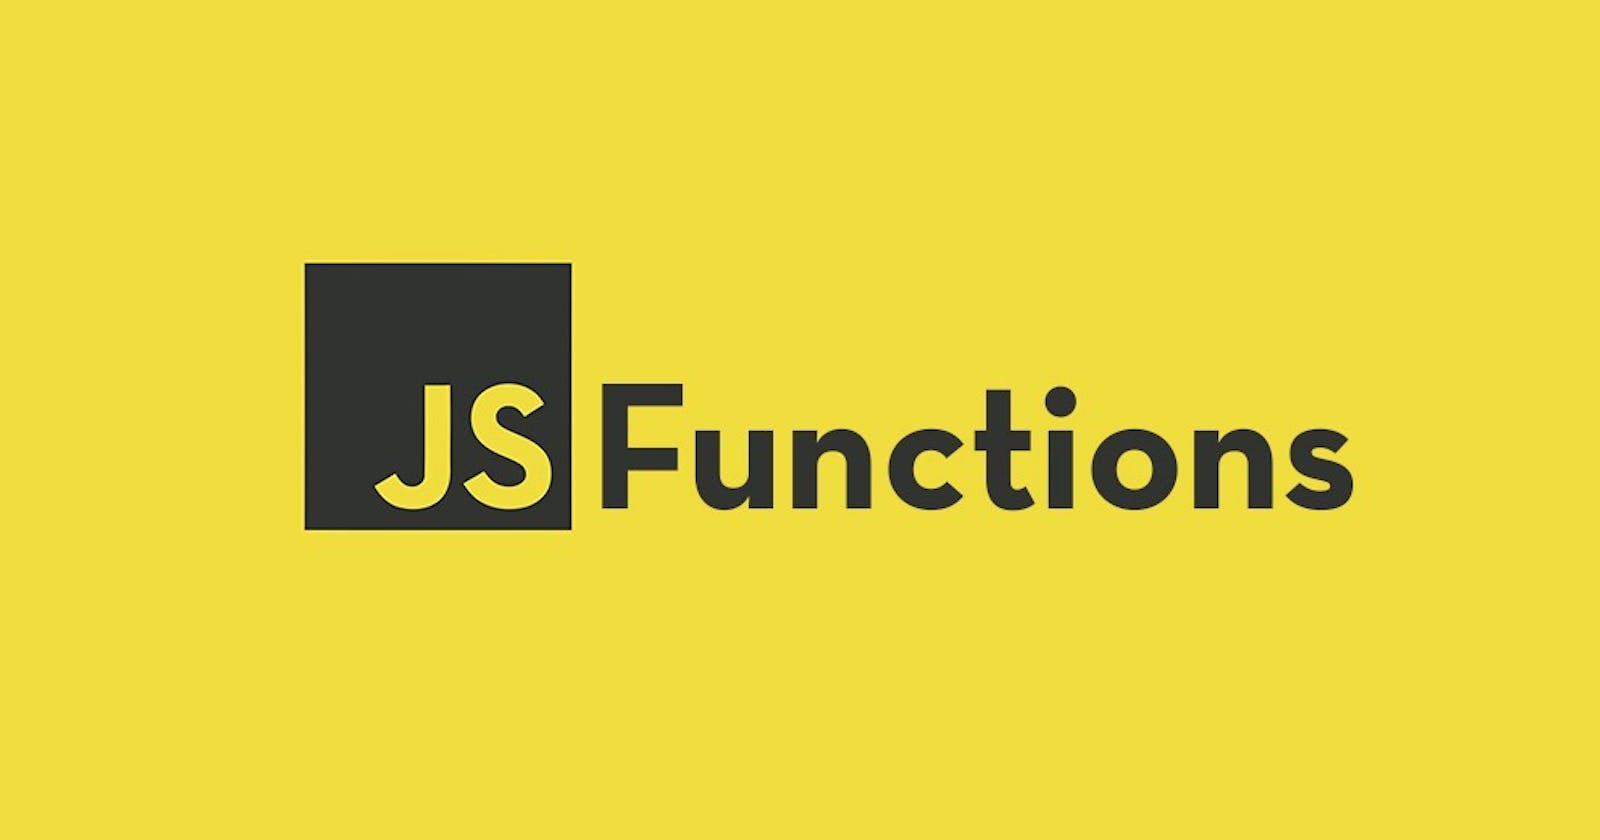 All about functions in javascript